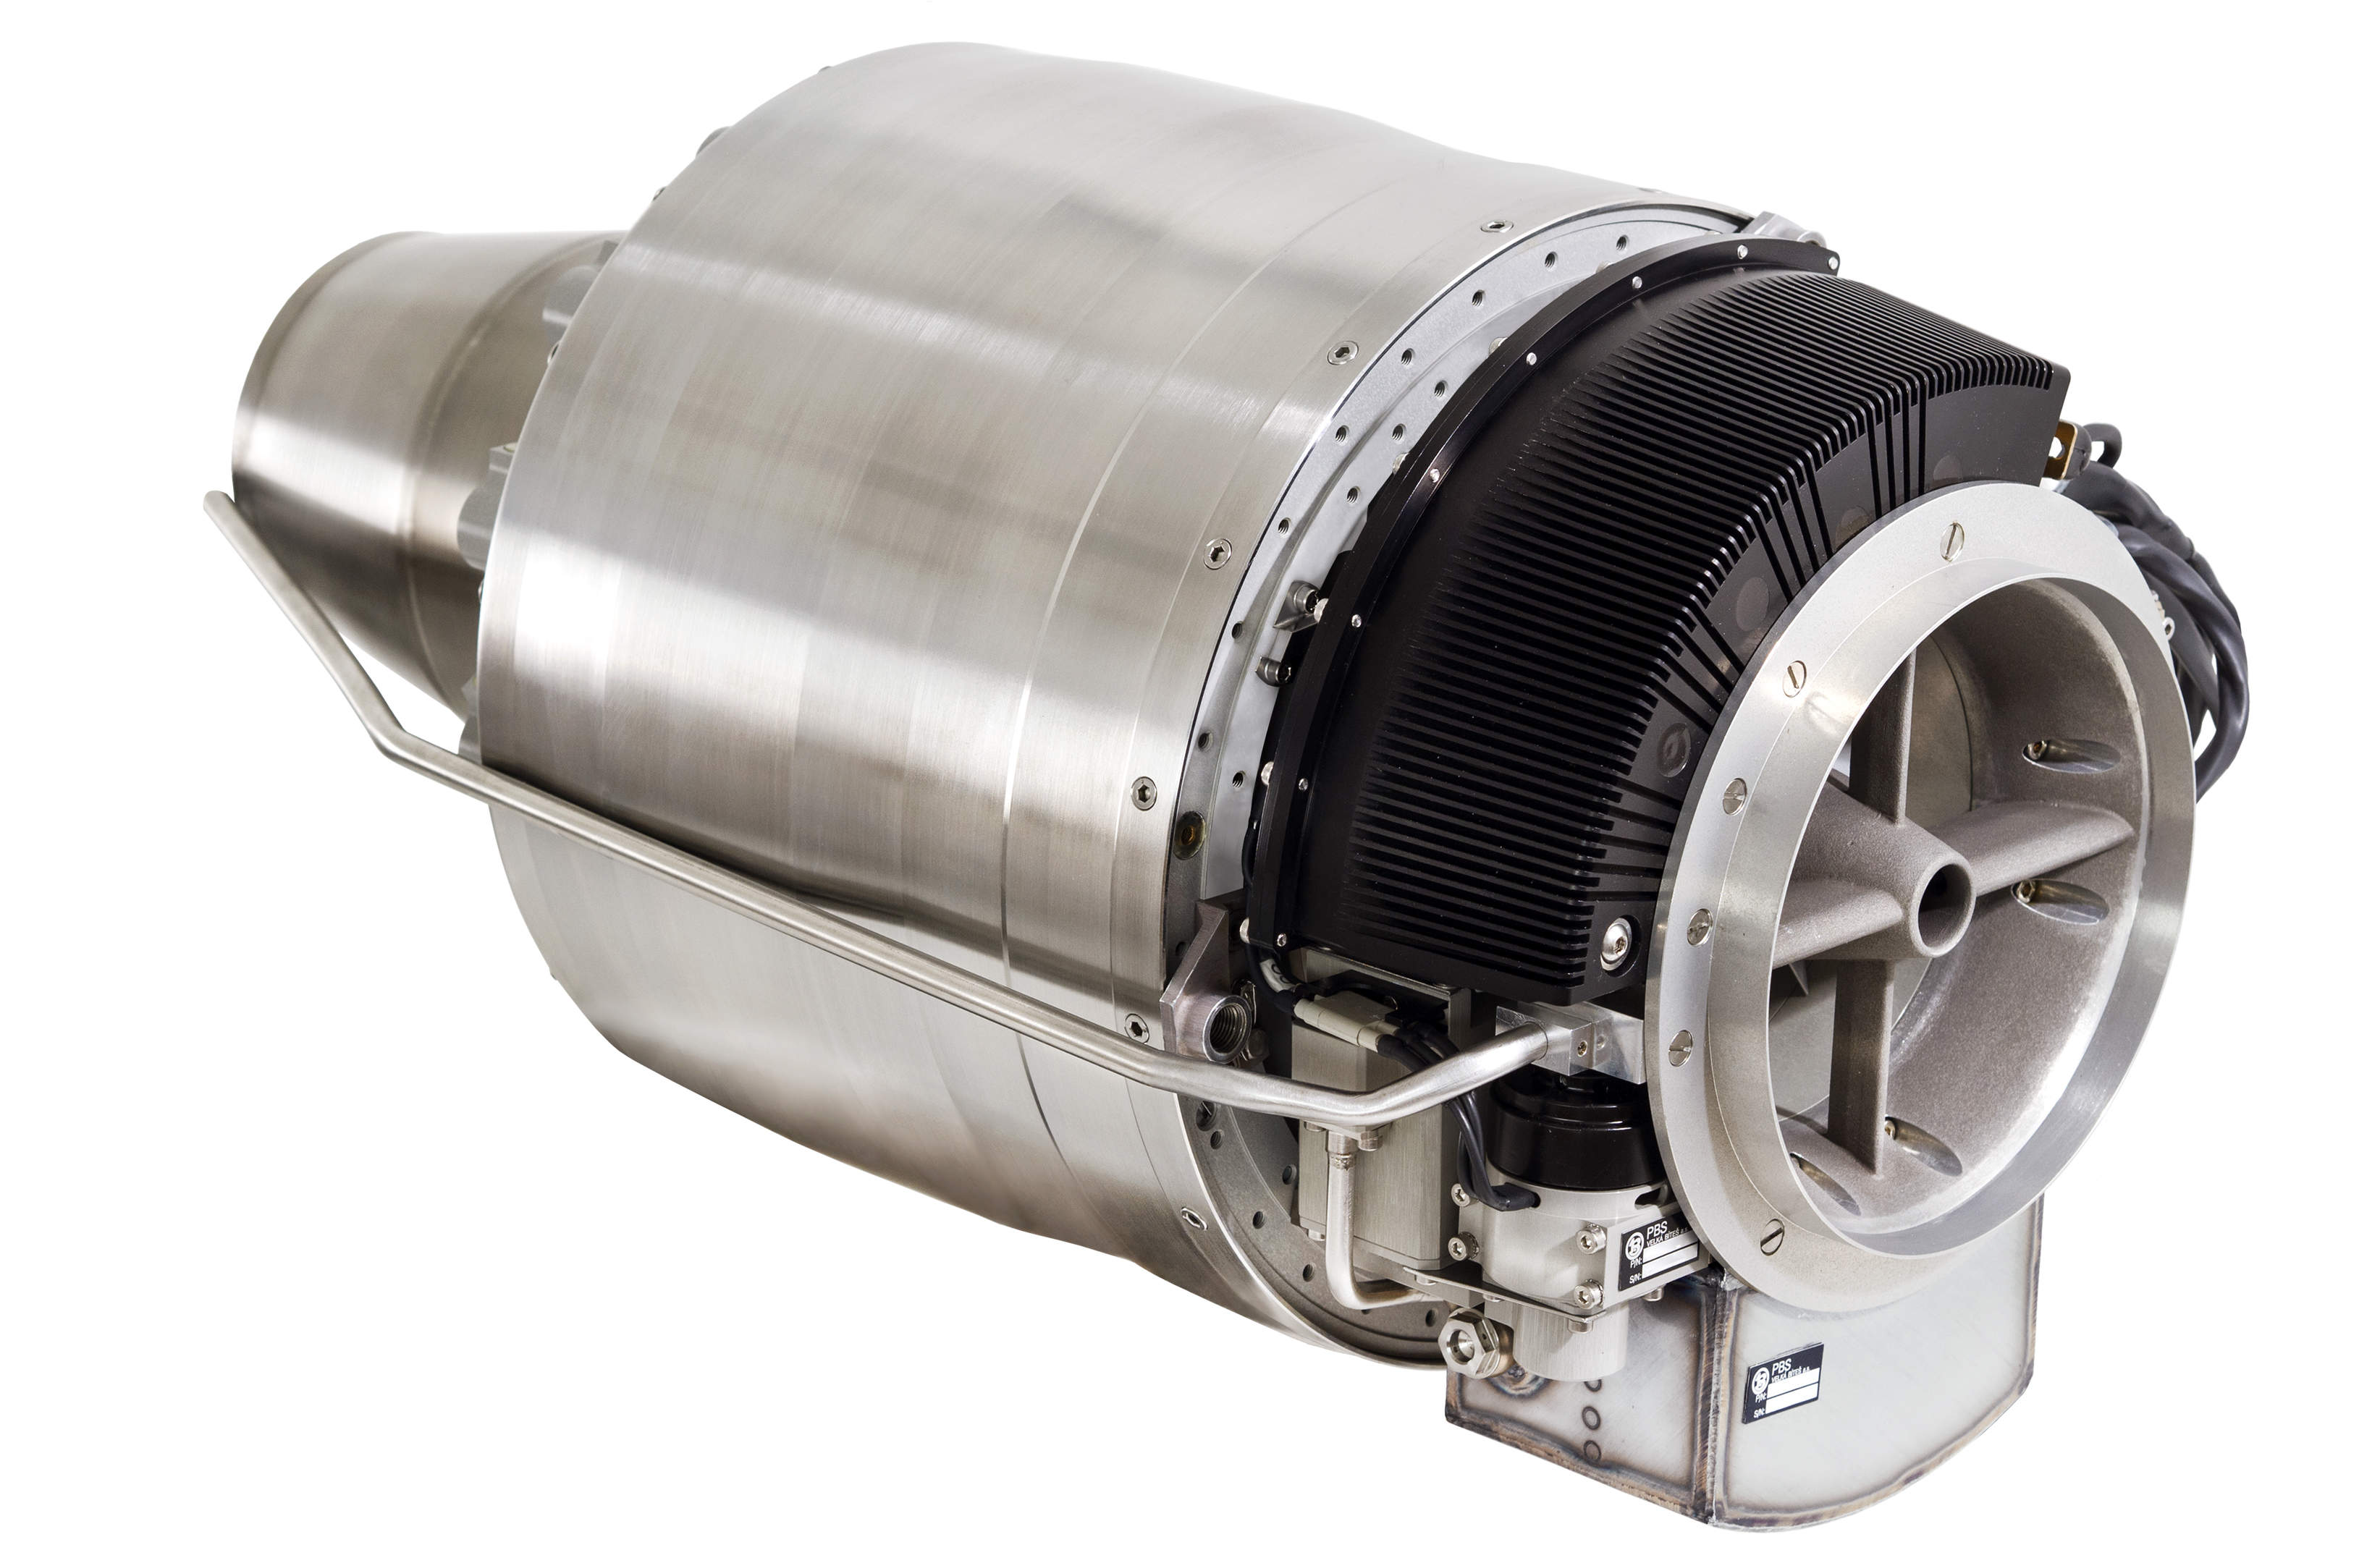 PBS will produce the 1,000th PBS TJ100 jet engine this year. It is going to present its latest PBS TJ150 turbine engine at the IDET trade fair